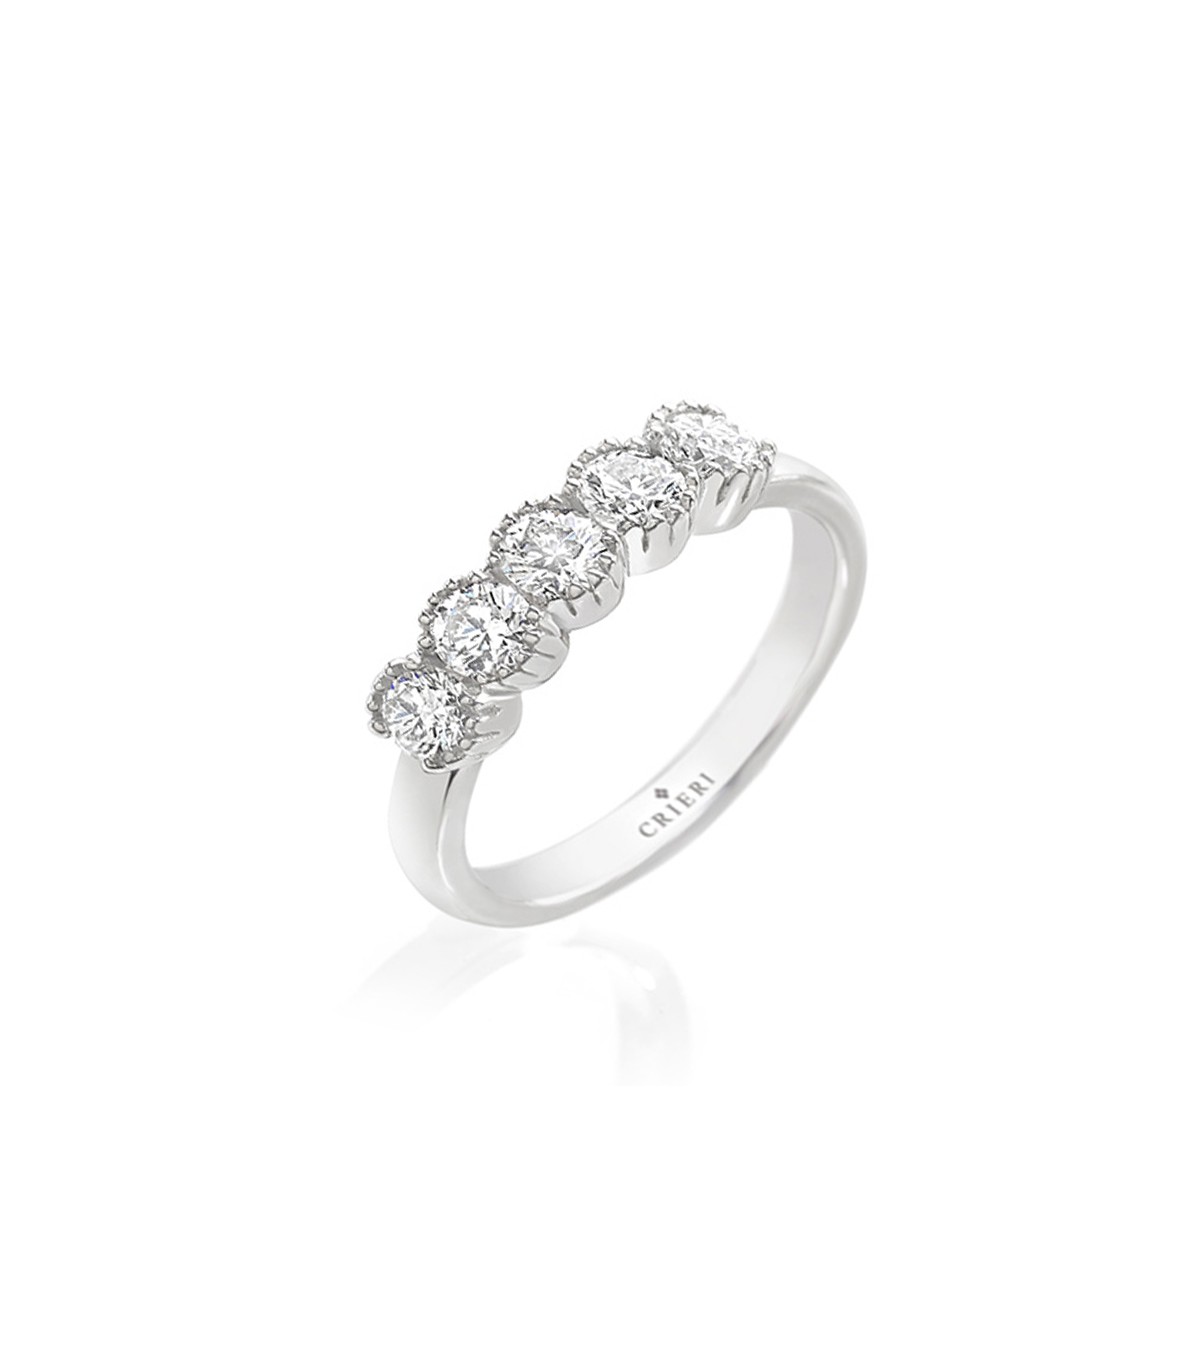 Riviere Crieri - Musa Ring in White Gold with Diamonds - 0